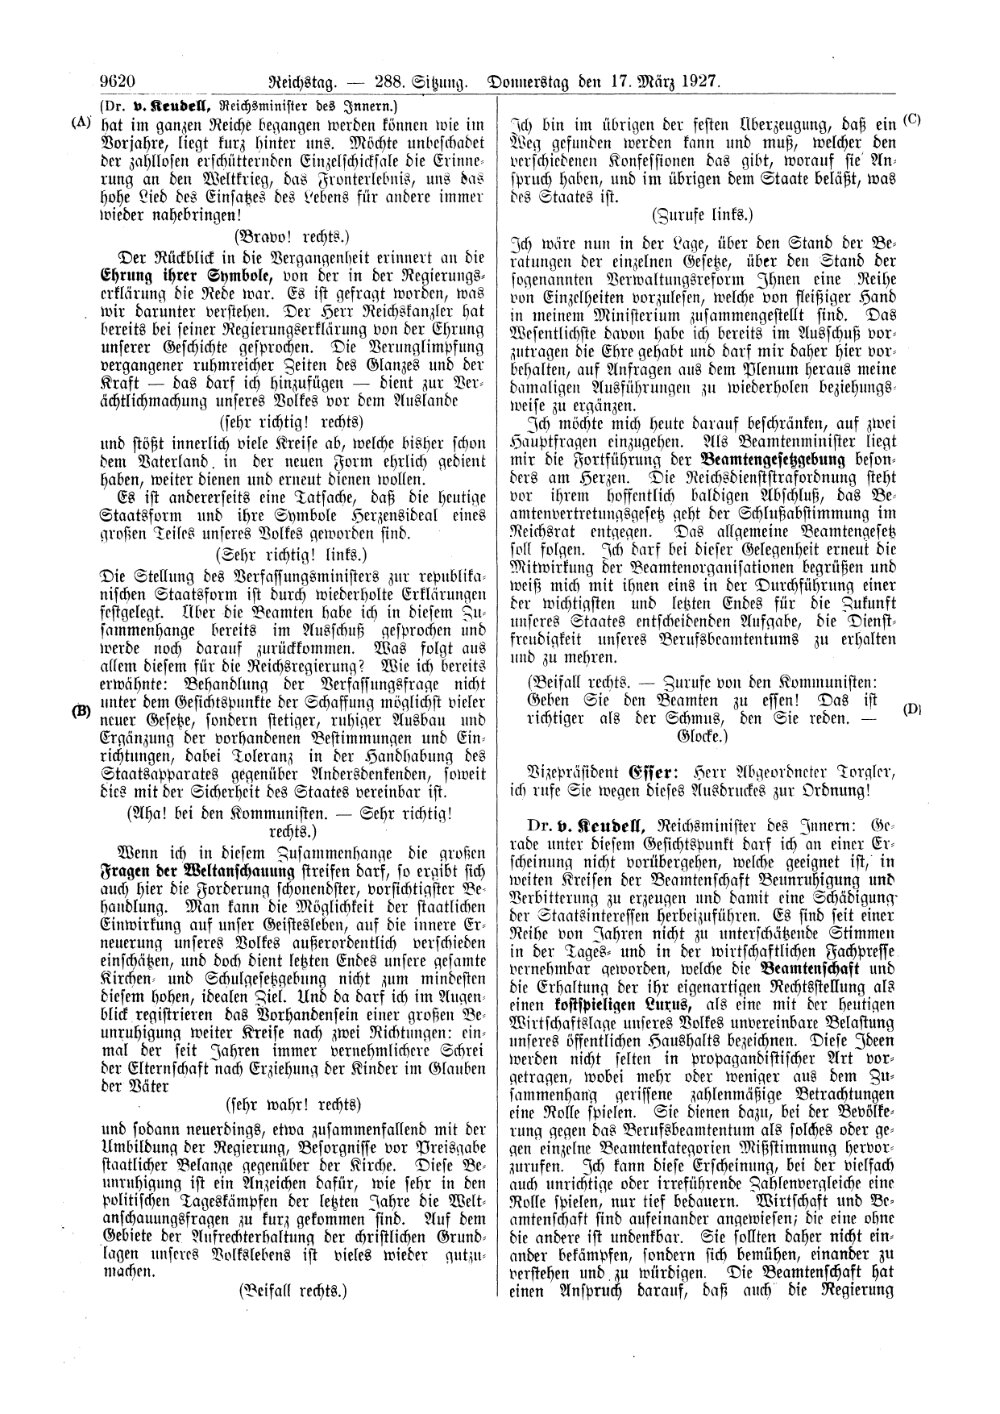 Scan of page 9620